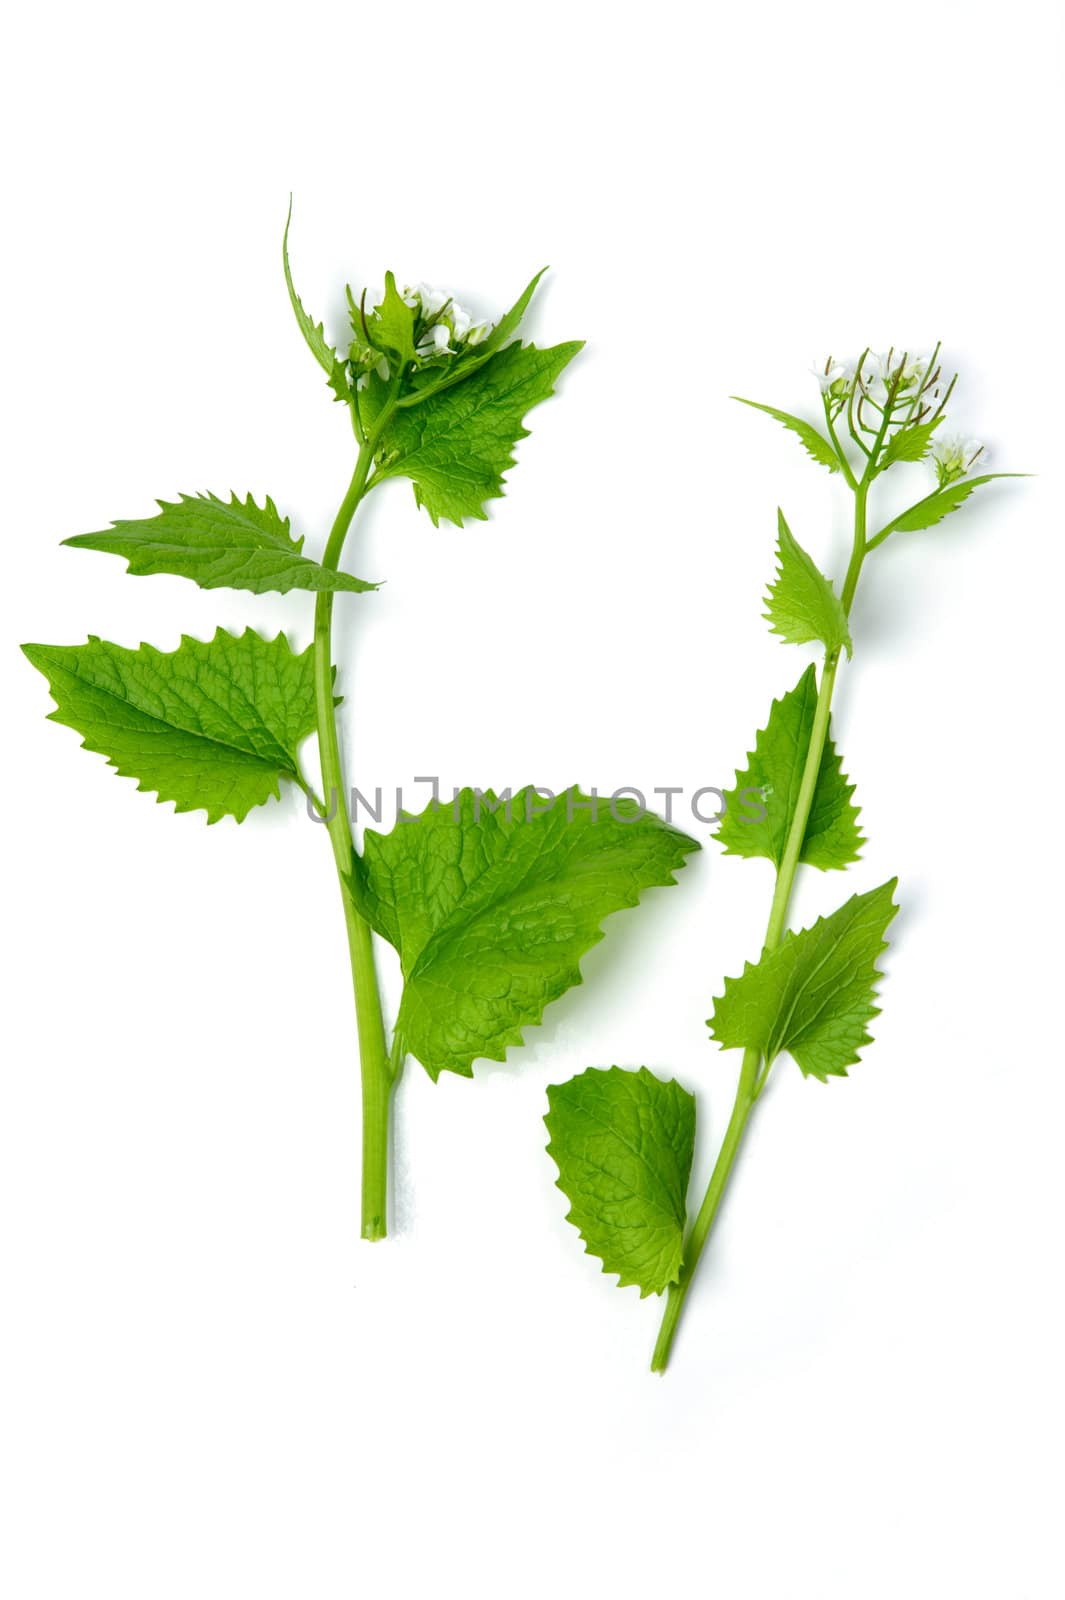 An image of deadnettle on white background